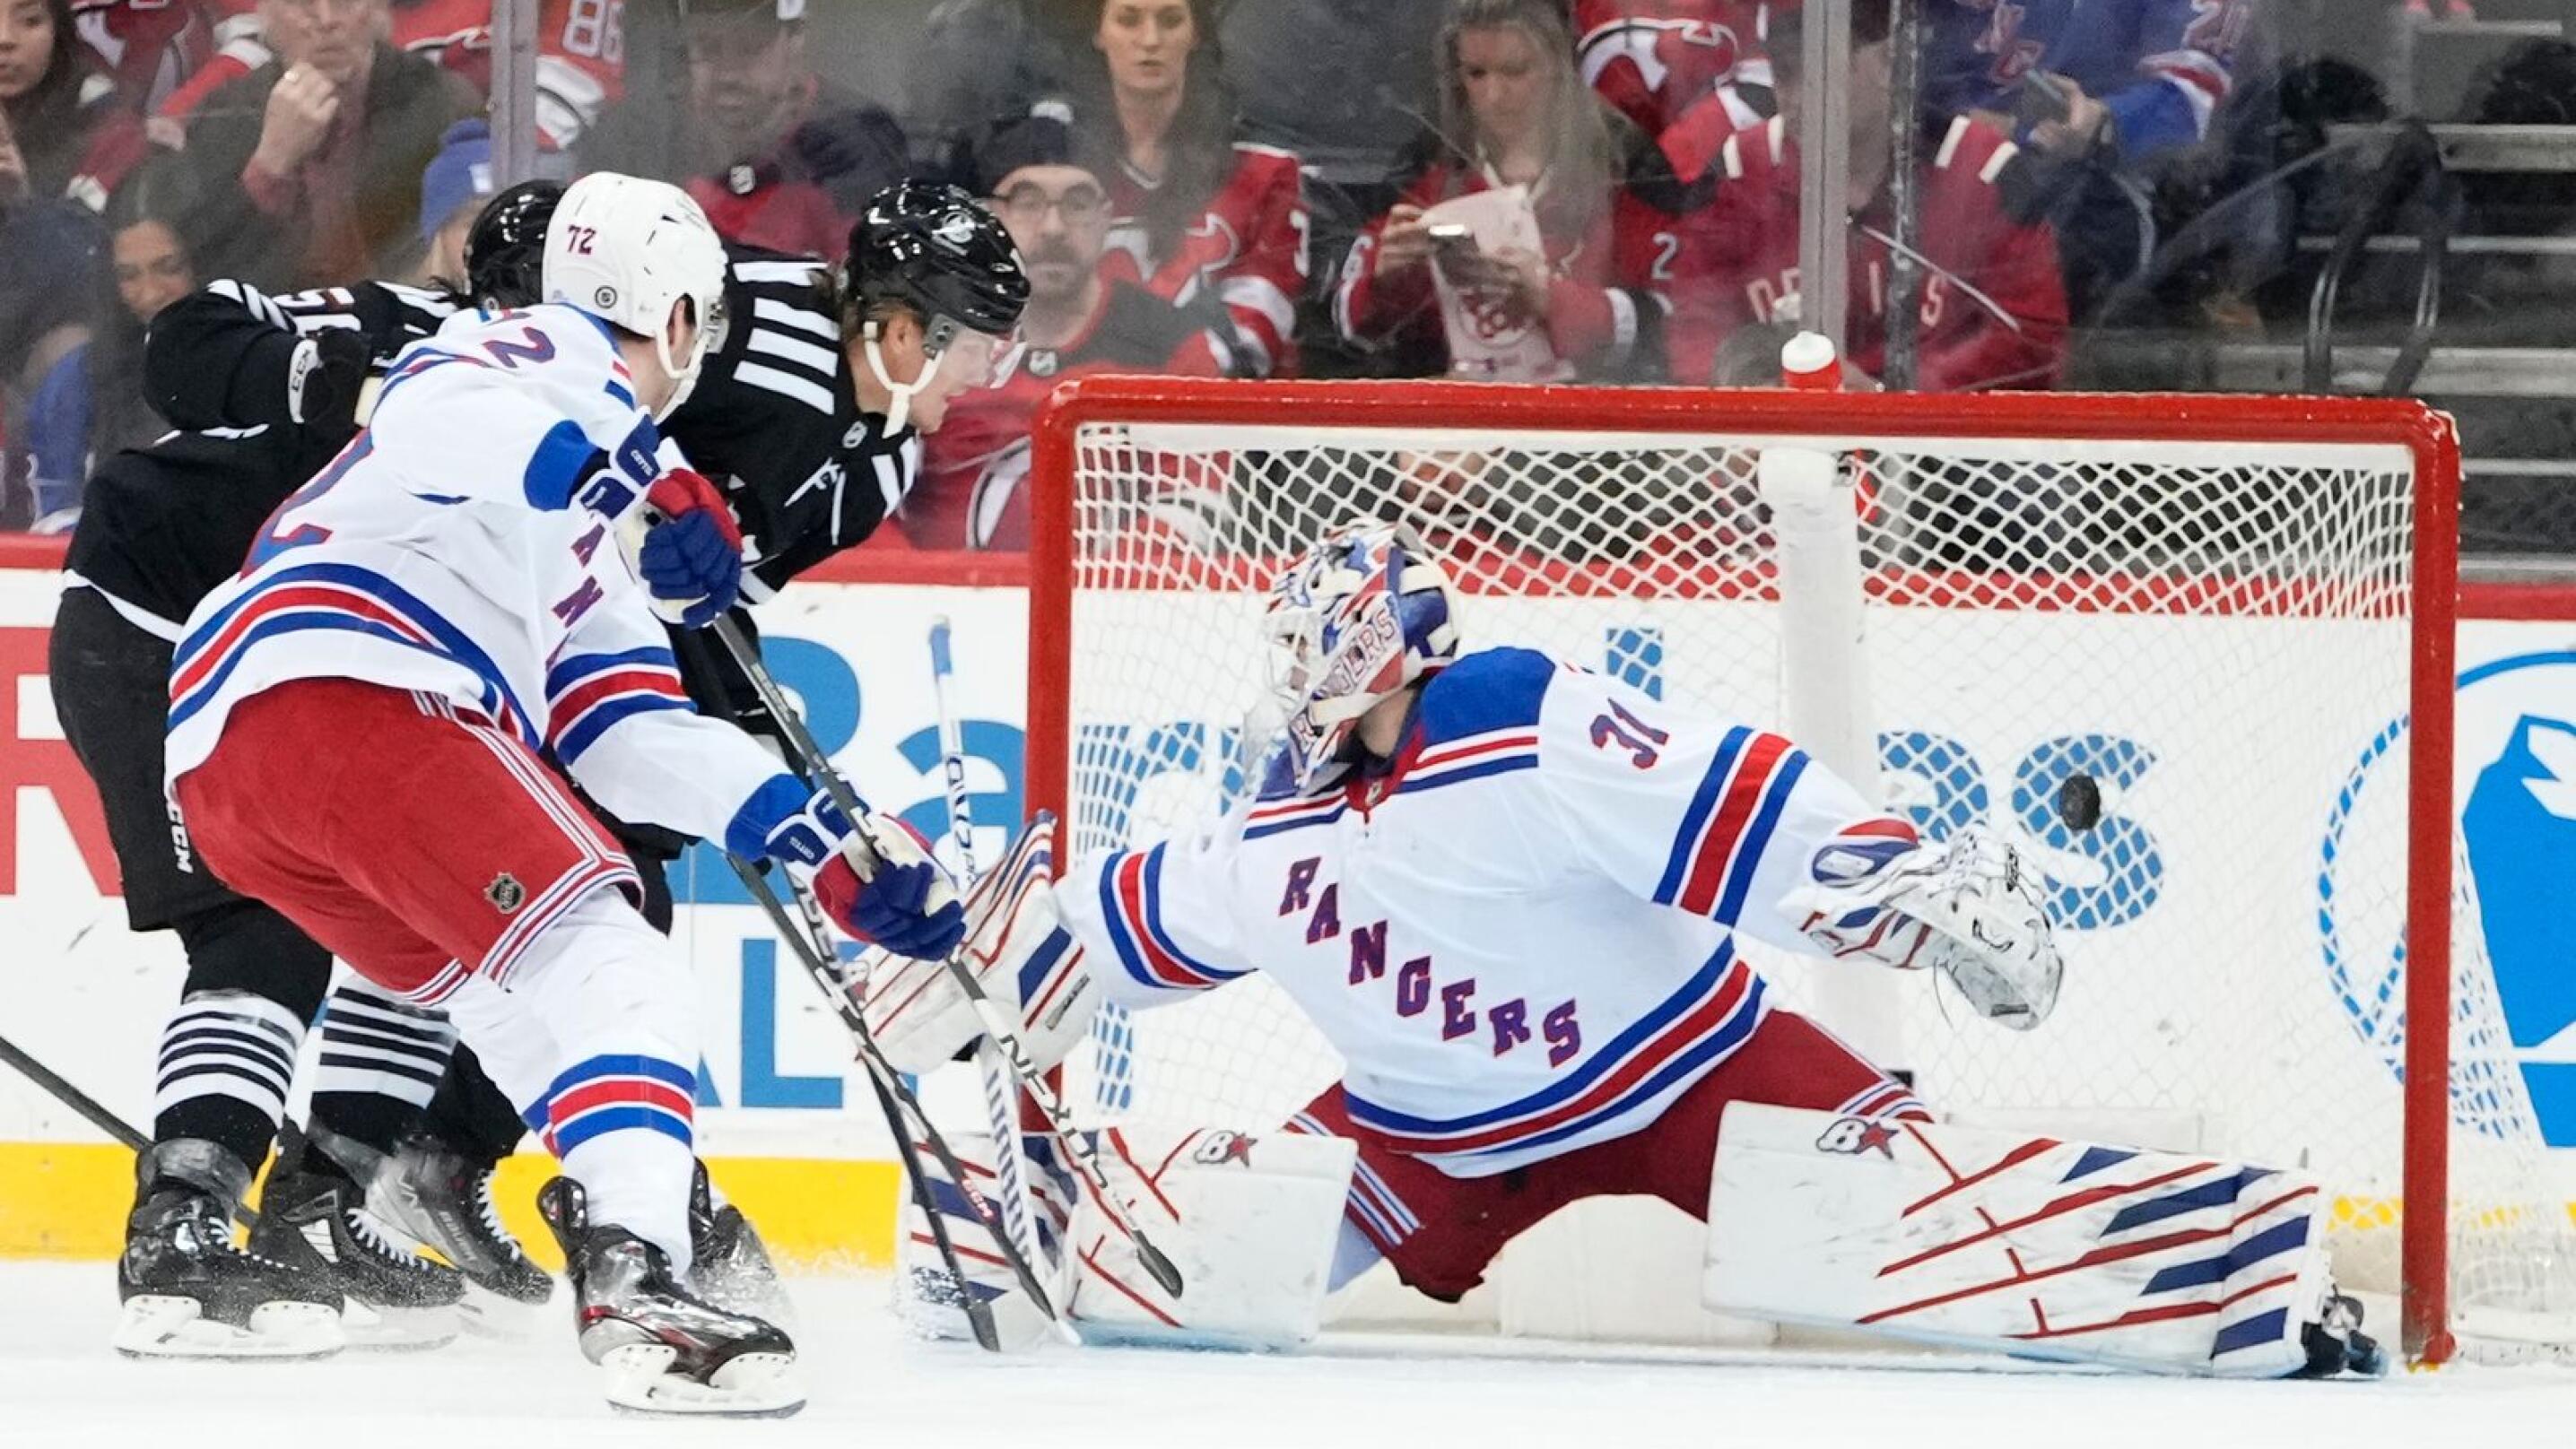 Kreider scores twice as Rangers open 2-game lead in series with Devils